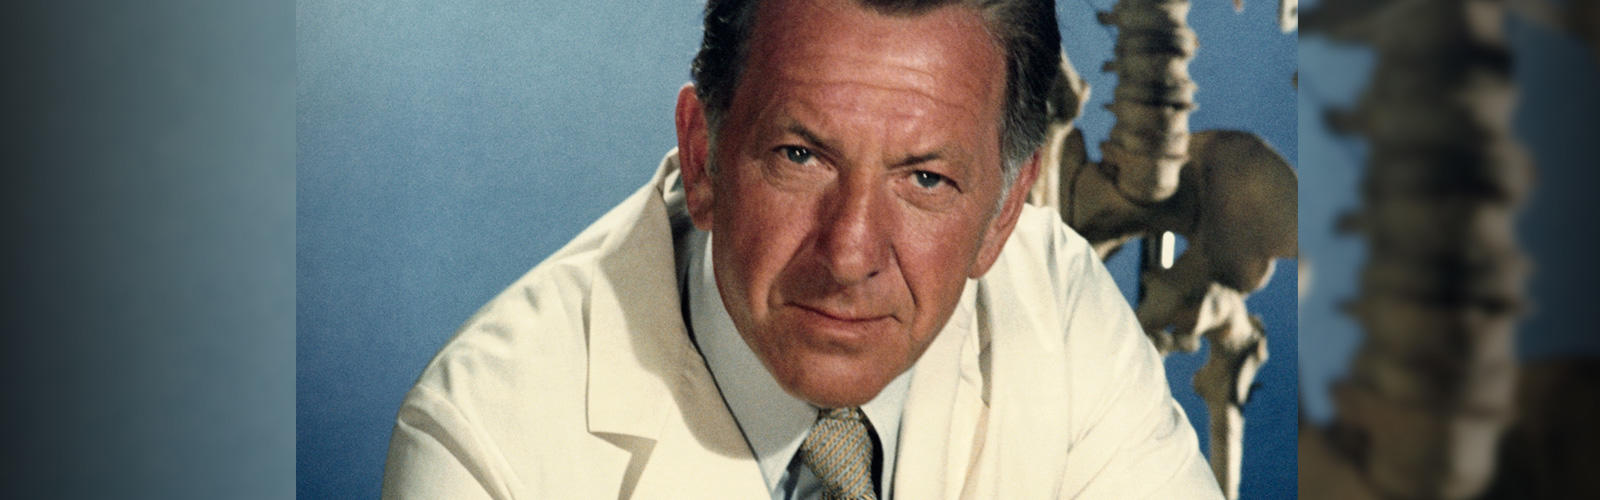 Jack Klugman as Quincy, M.E., looks at the camera with anatomical skeleton in the background